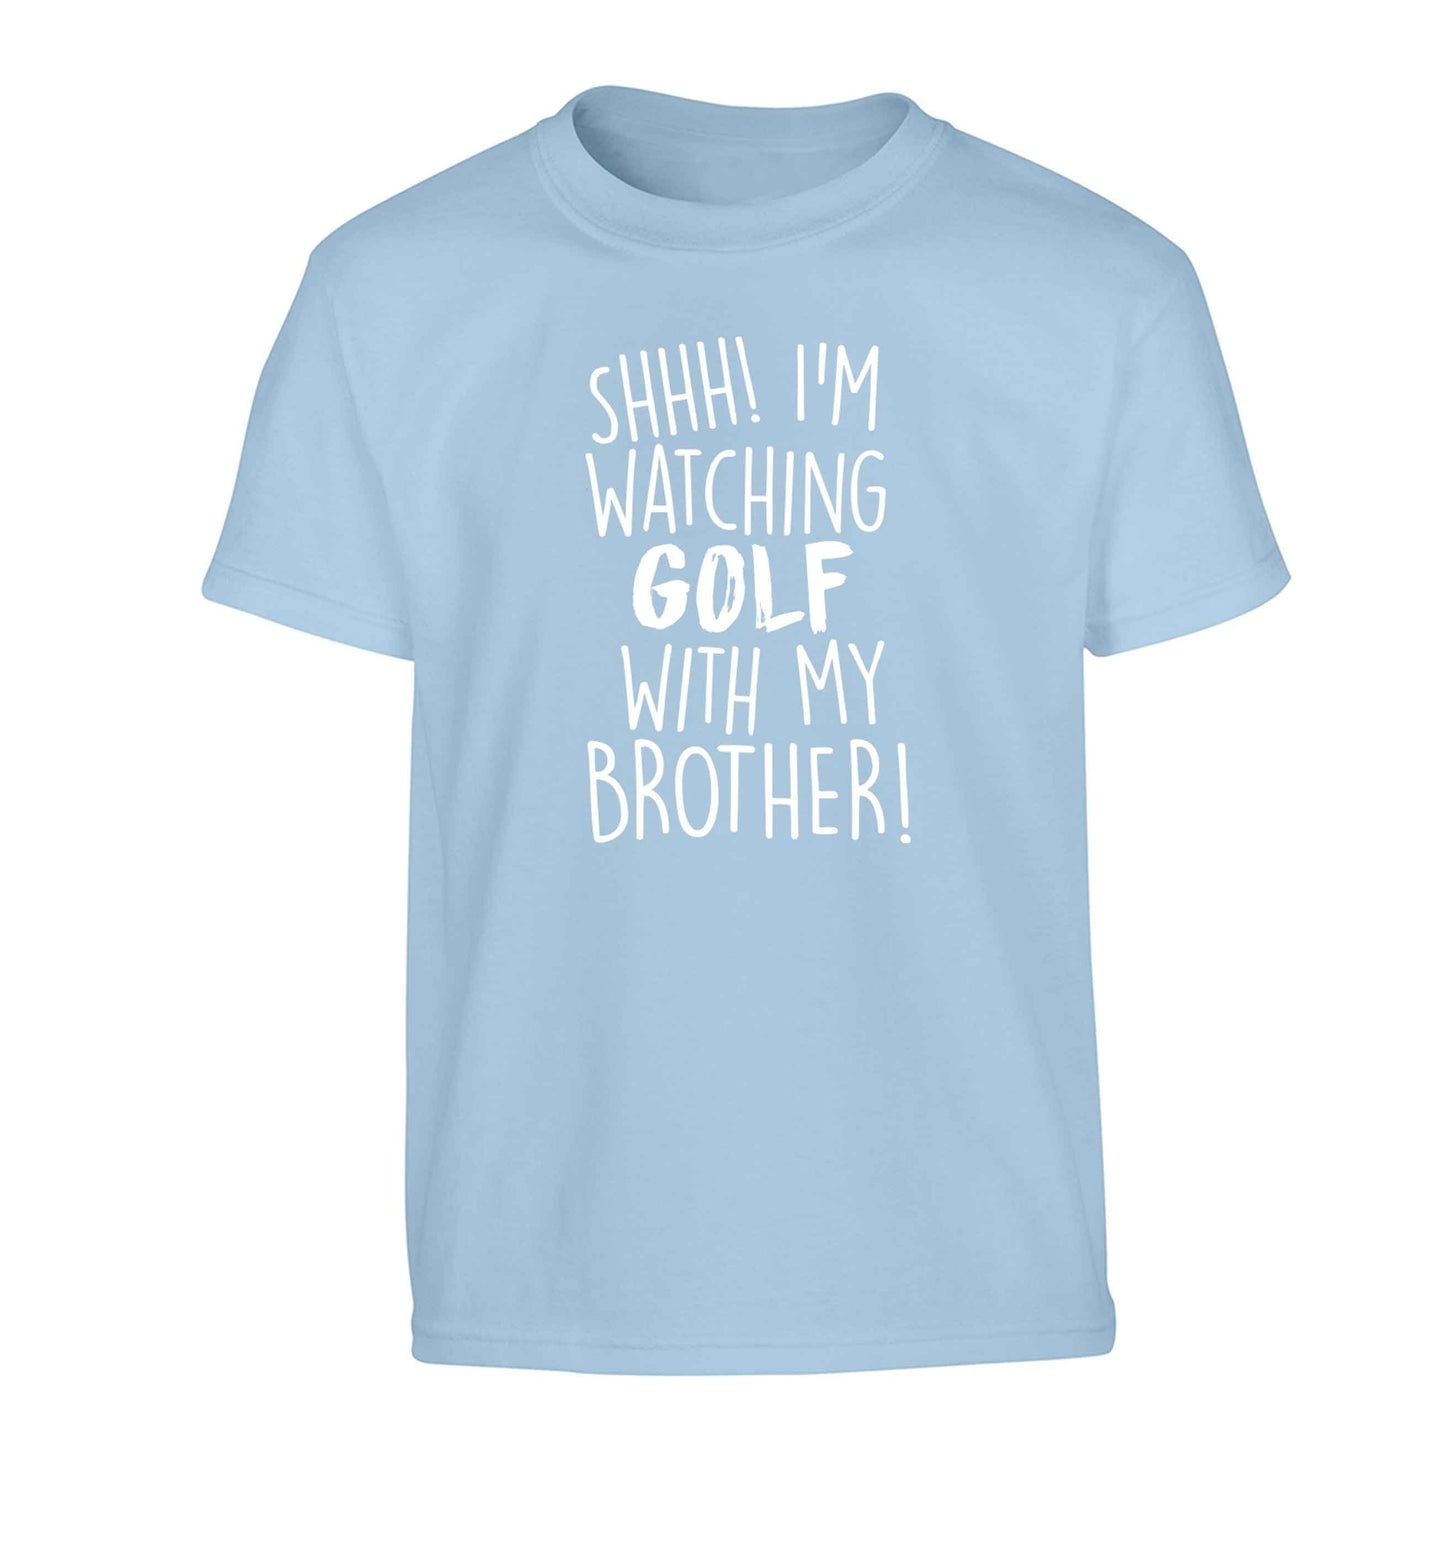 Shh I'm watching golf with my brother Children's light blue Tshirt 12-13 Years